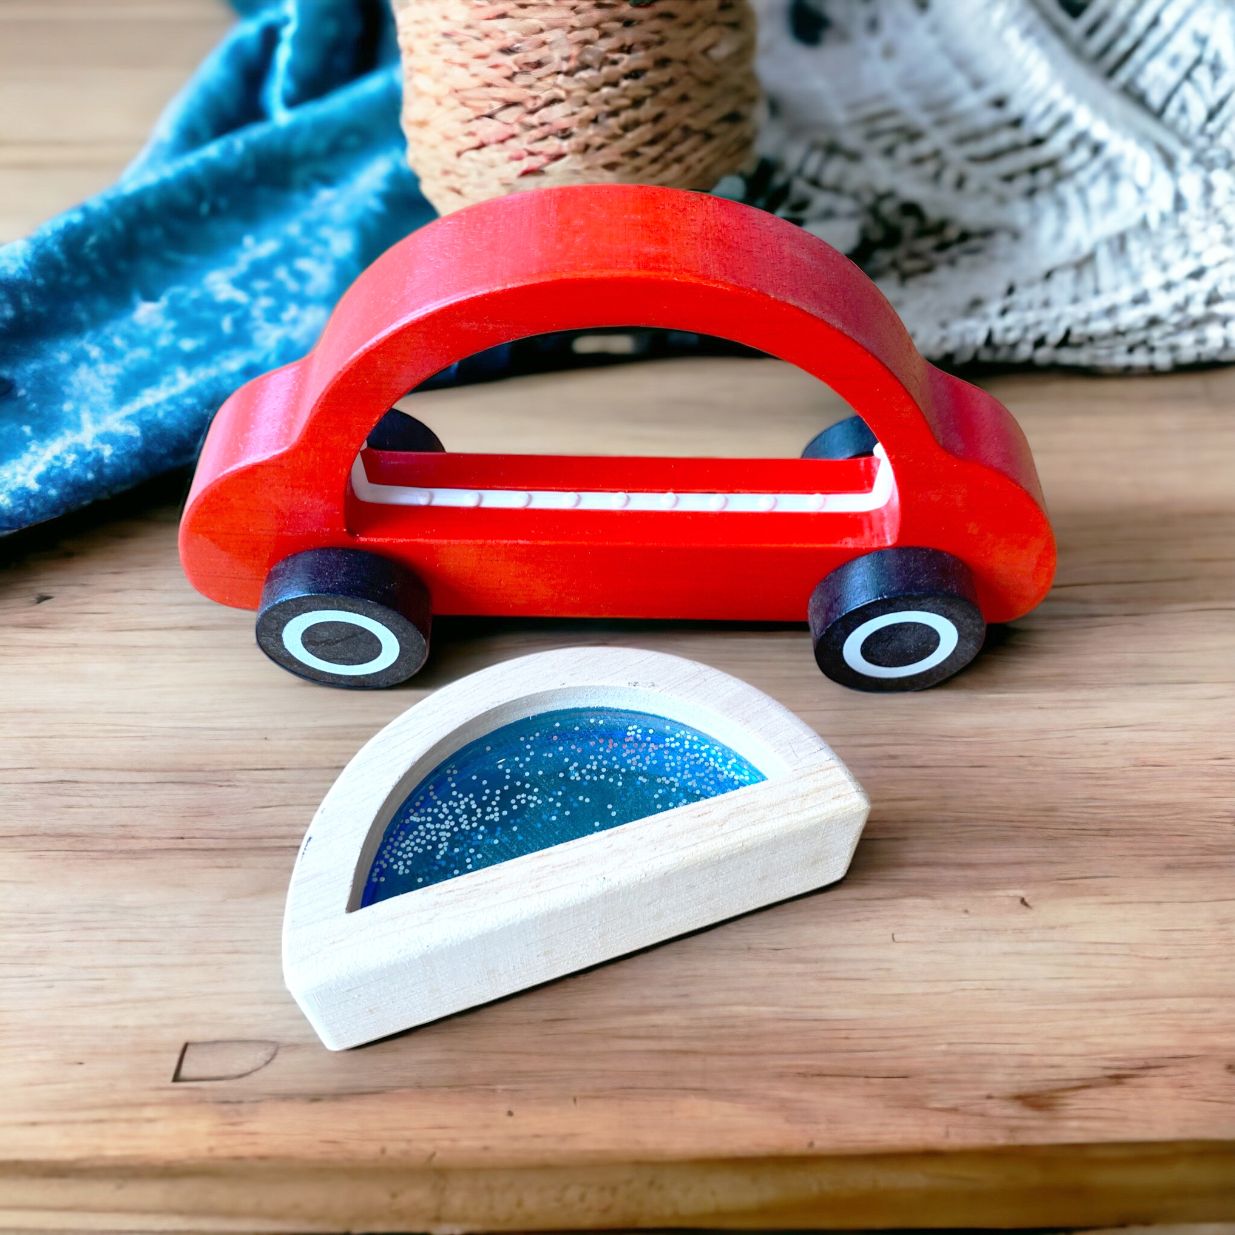 Wooden Sensory Car with liquid and sparkles Perfect gift